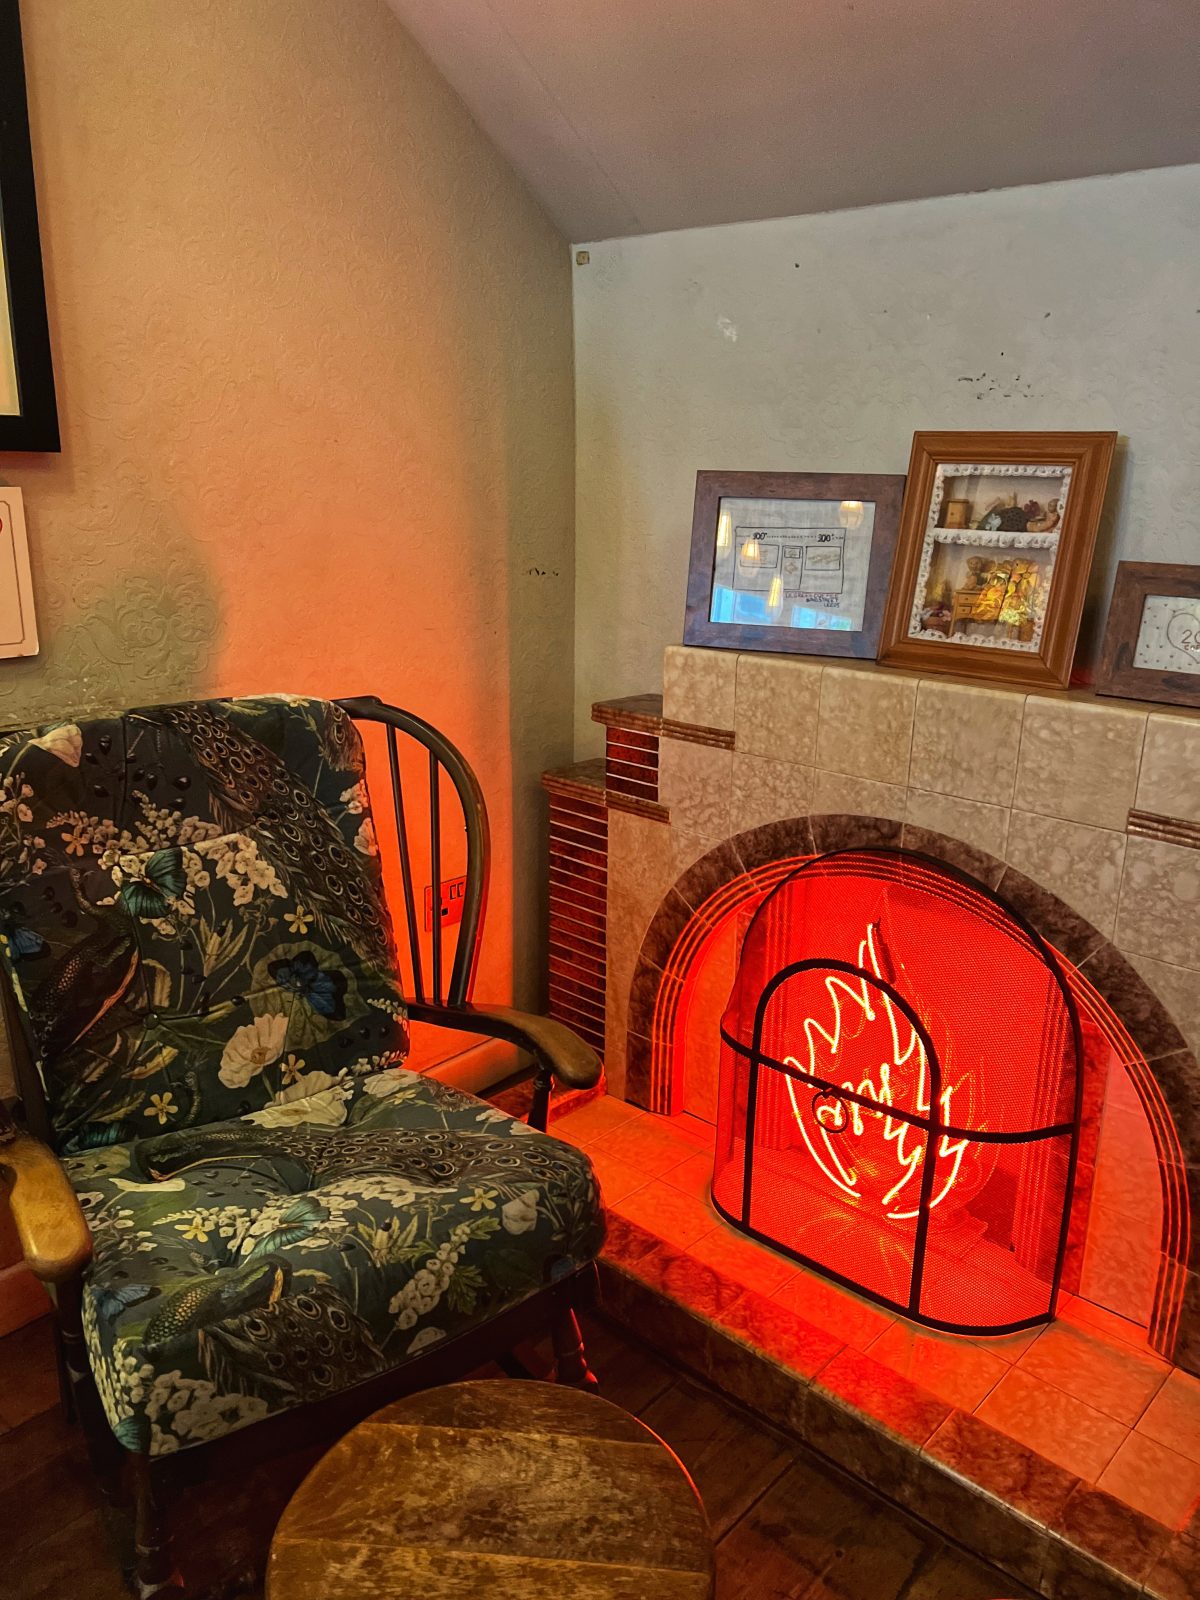 fireplace with a neon sign and pattern sofa on it.